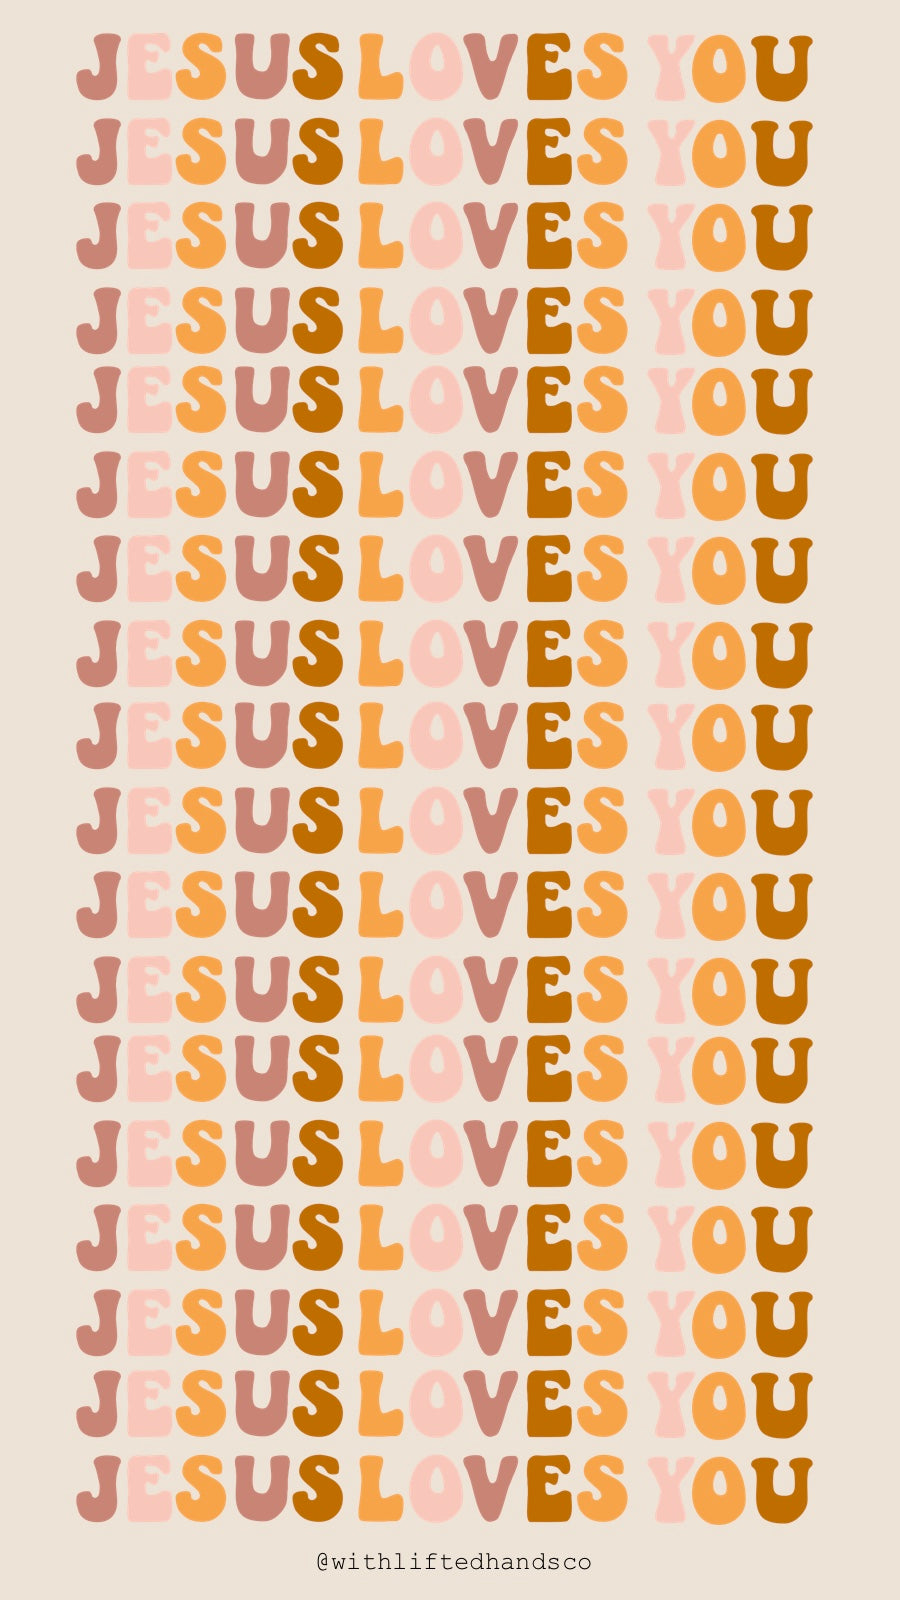 Jesus loves you phone wallpapers by with lifted hands co